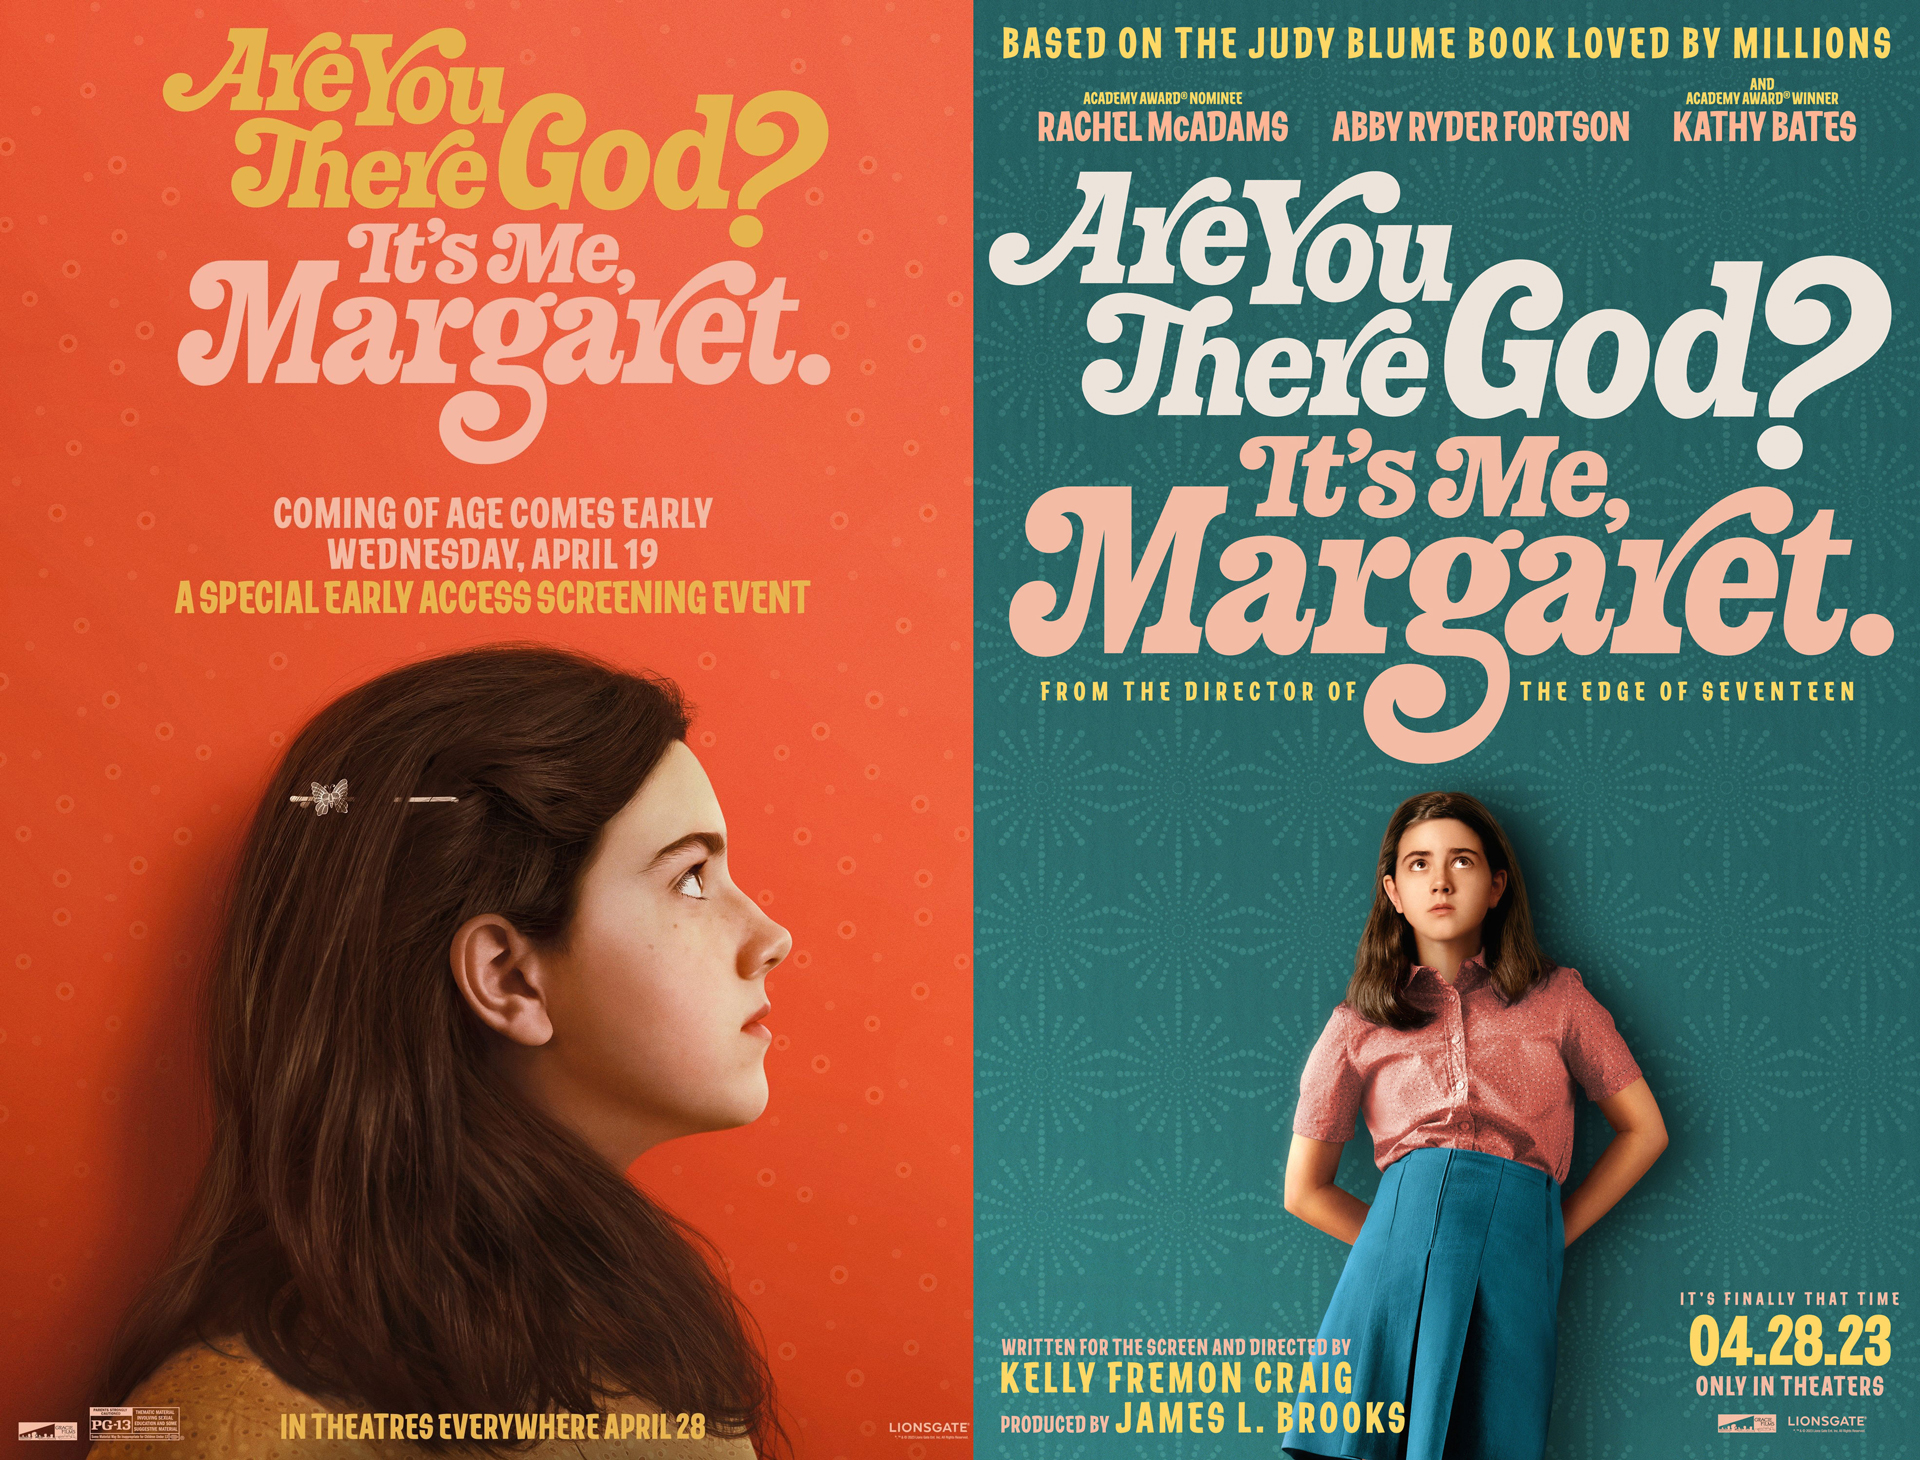 Are You There God? It's Me Margaret posters with type in a 70s style and an image of a dark haired young girl underneath the lettering